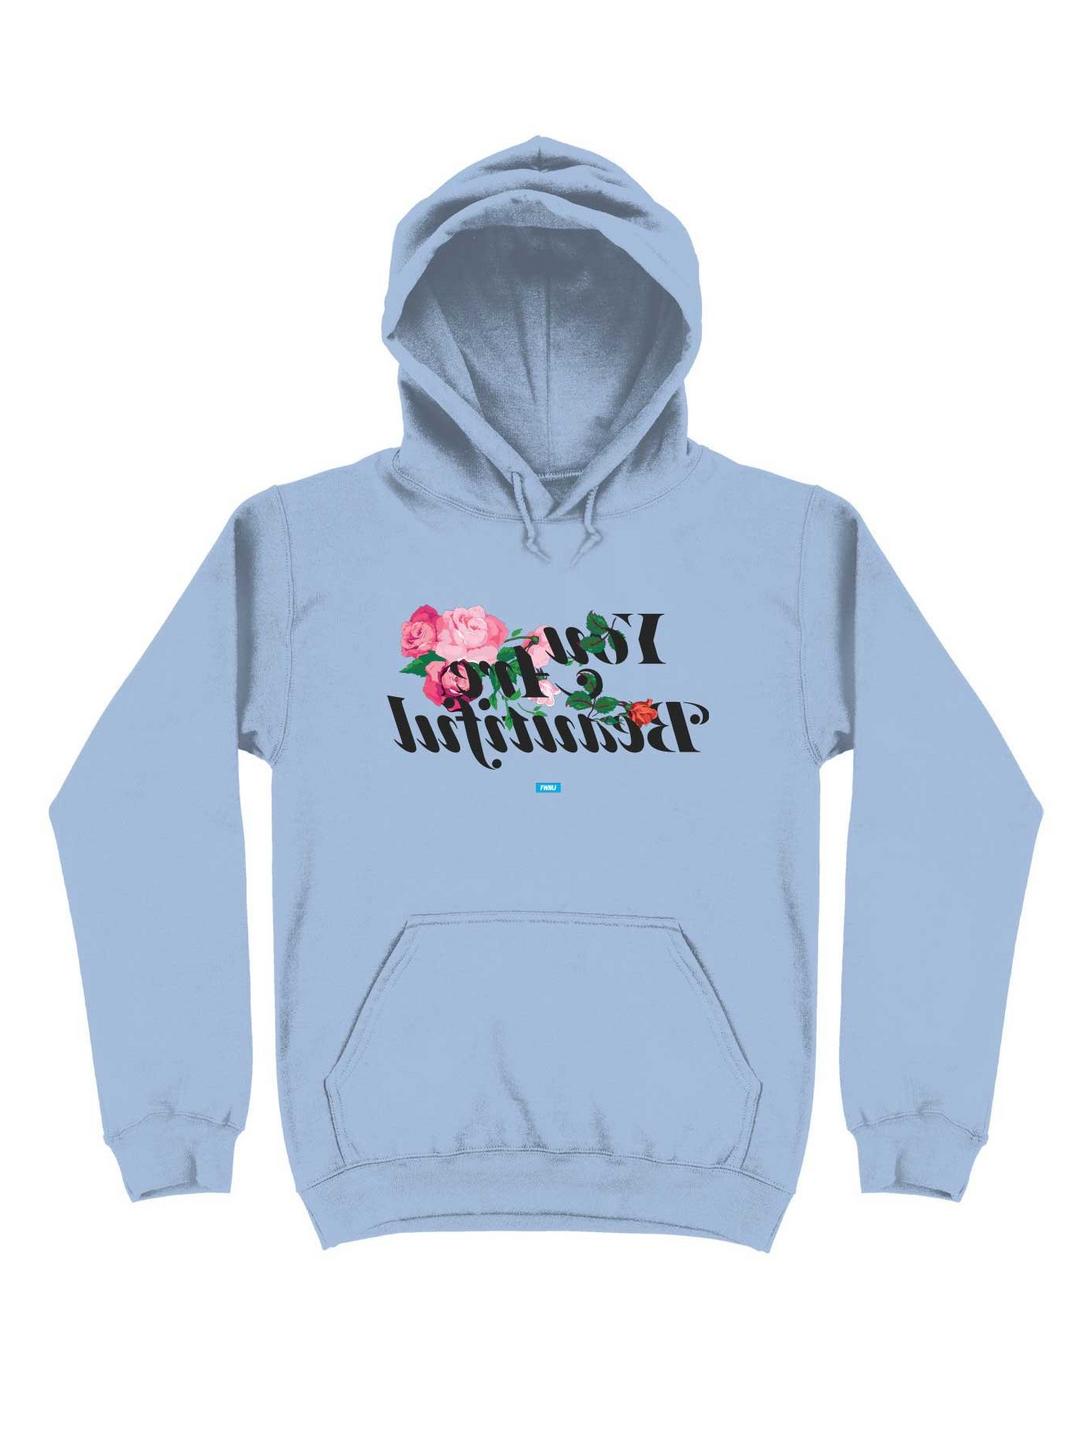 Black History Month FWMJ You Are Beautiful Hoodie, LIGHT BLUE, hi-res